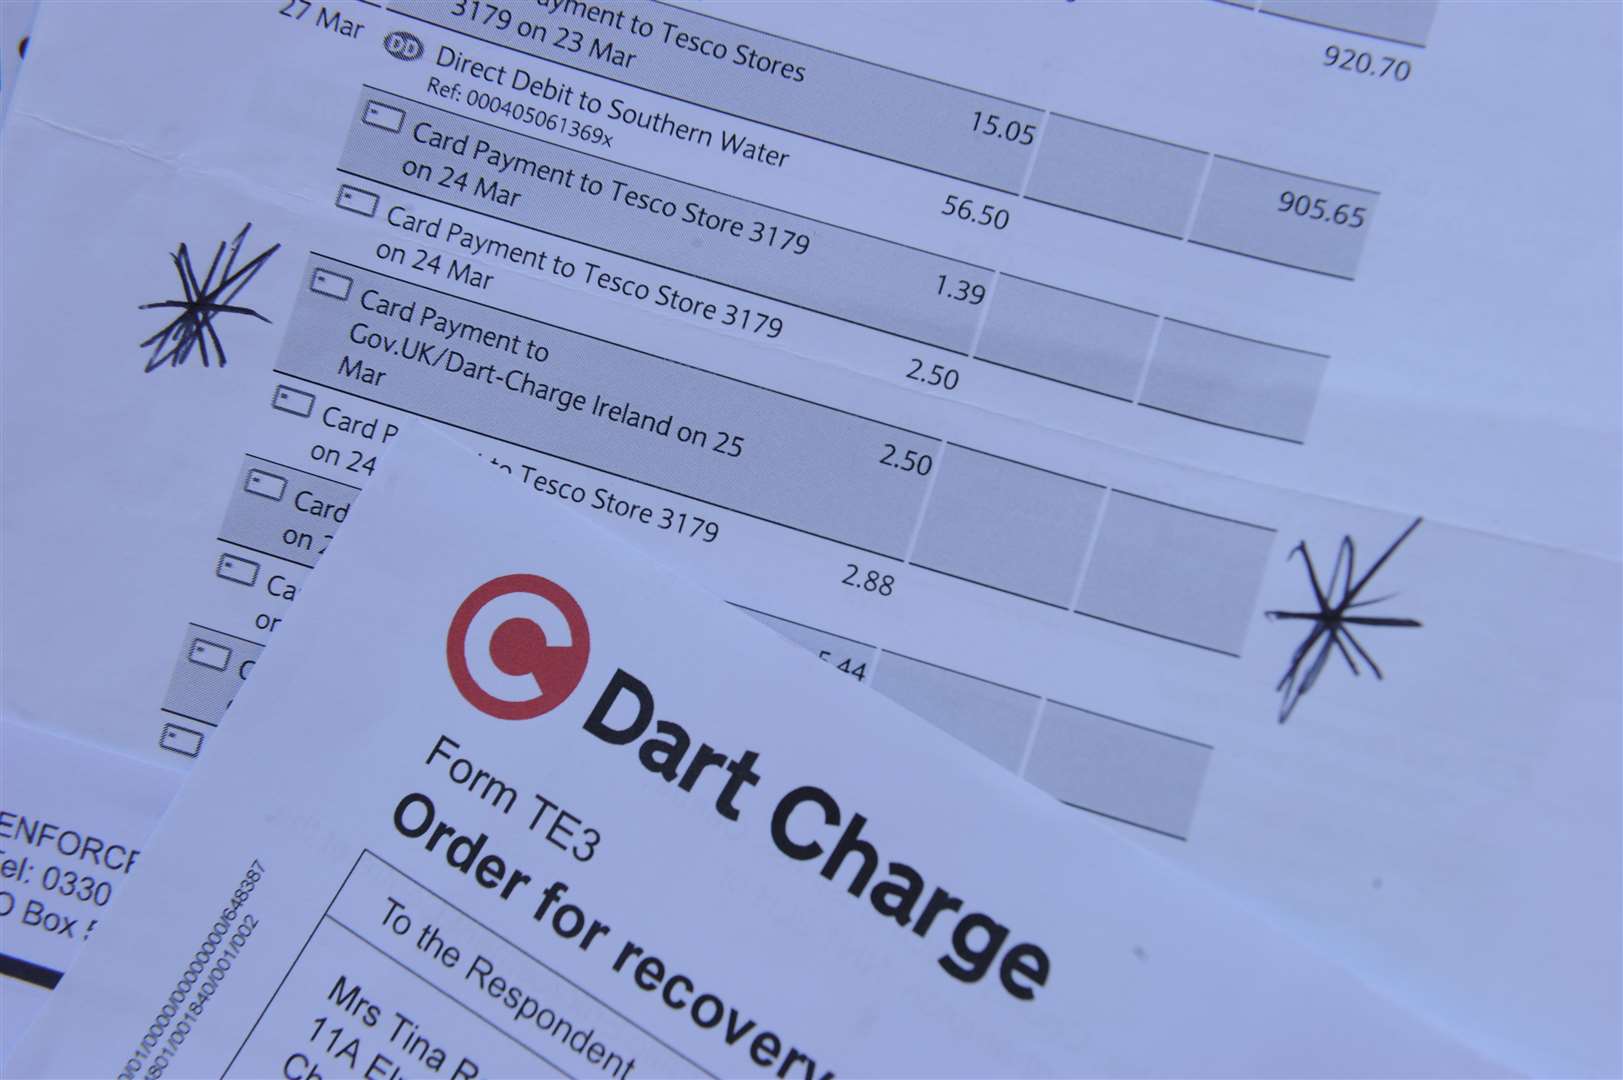 Dart Charge fares will increase for account holders from £1.67 to £2 per trip at the start of October